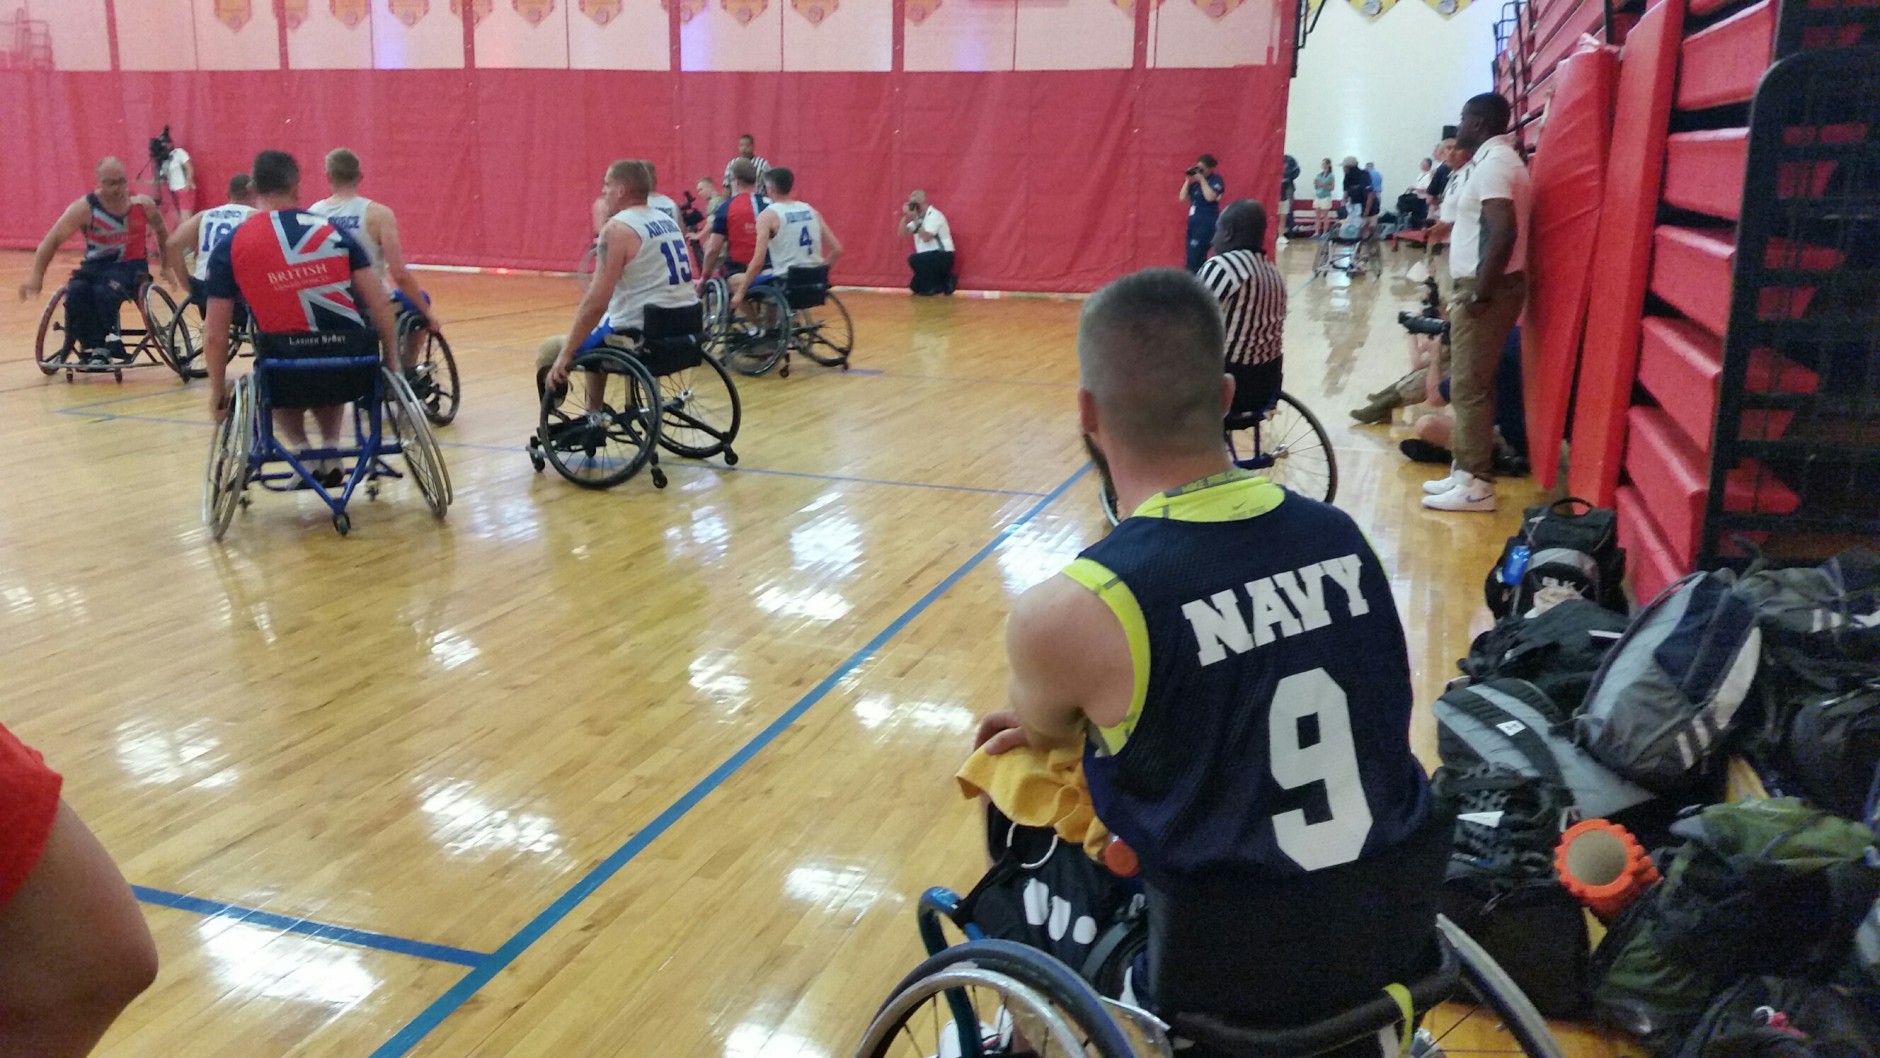 The 2015 Warrior Games kicked off Saturday with a wheelchair basketball competition between the  US Air Force and British armed forces. (WTOP/Kathy Stewart)